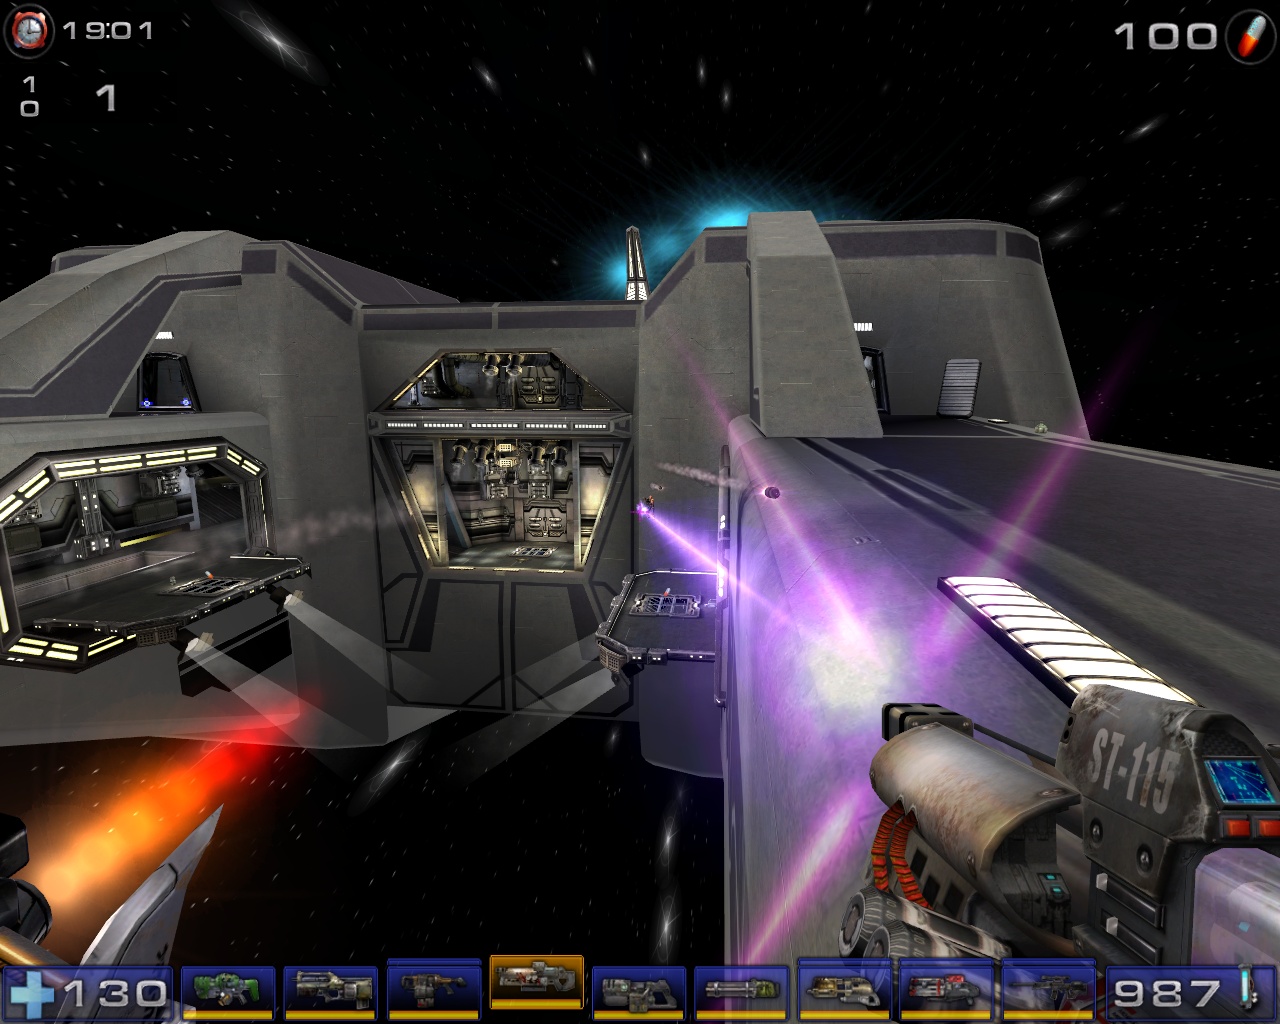 Unreal tournament 2004 on steam фото 53